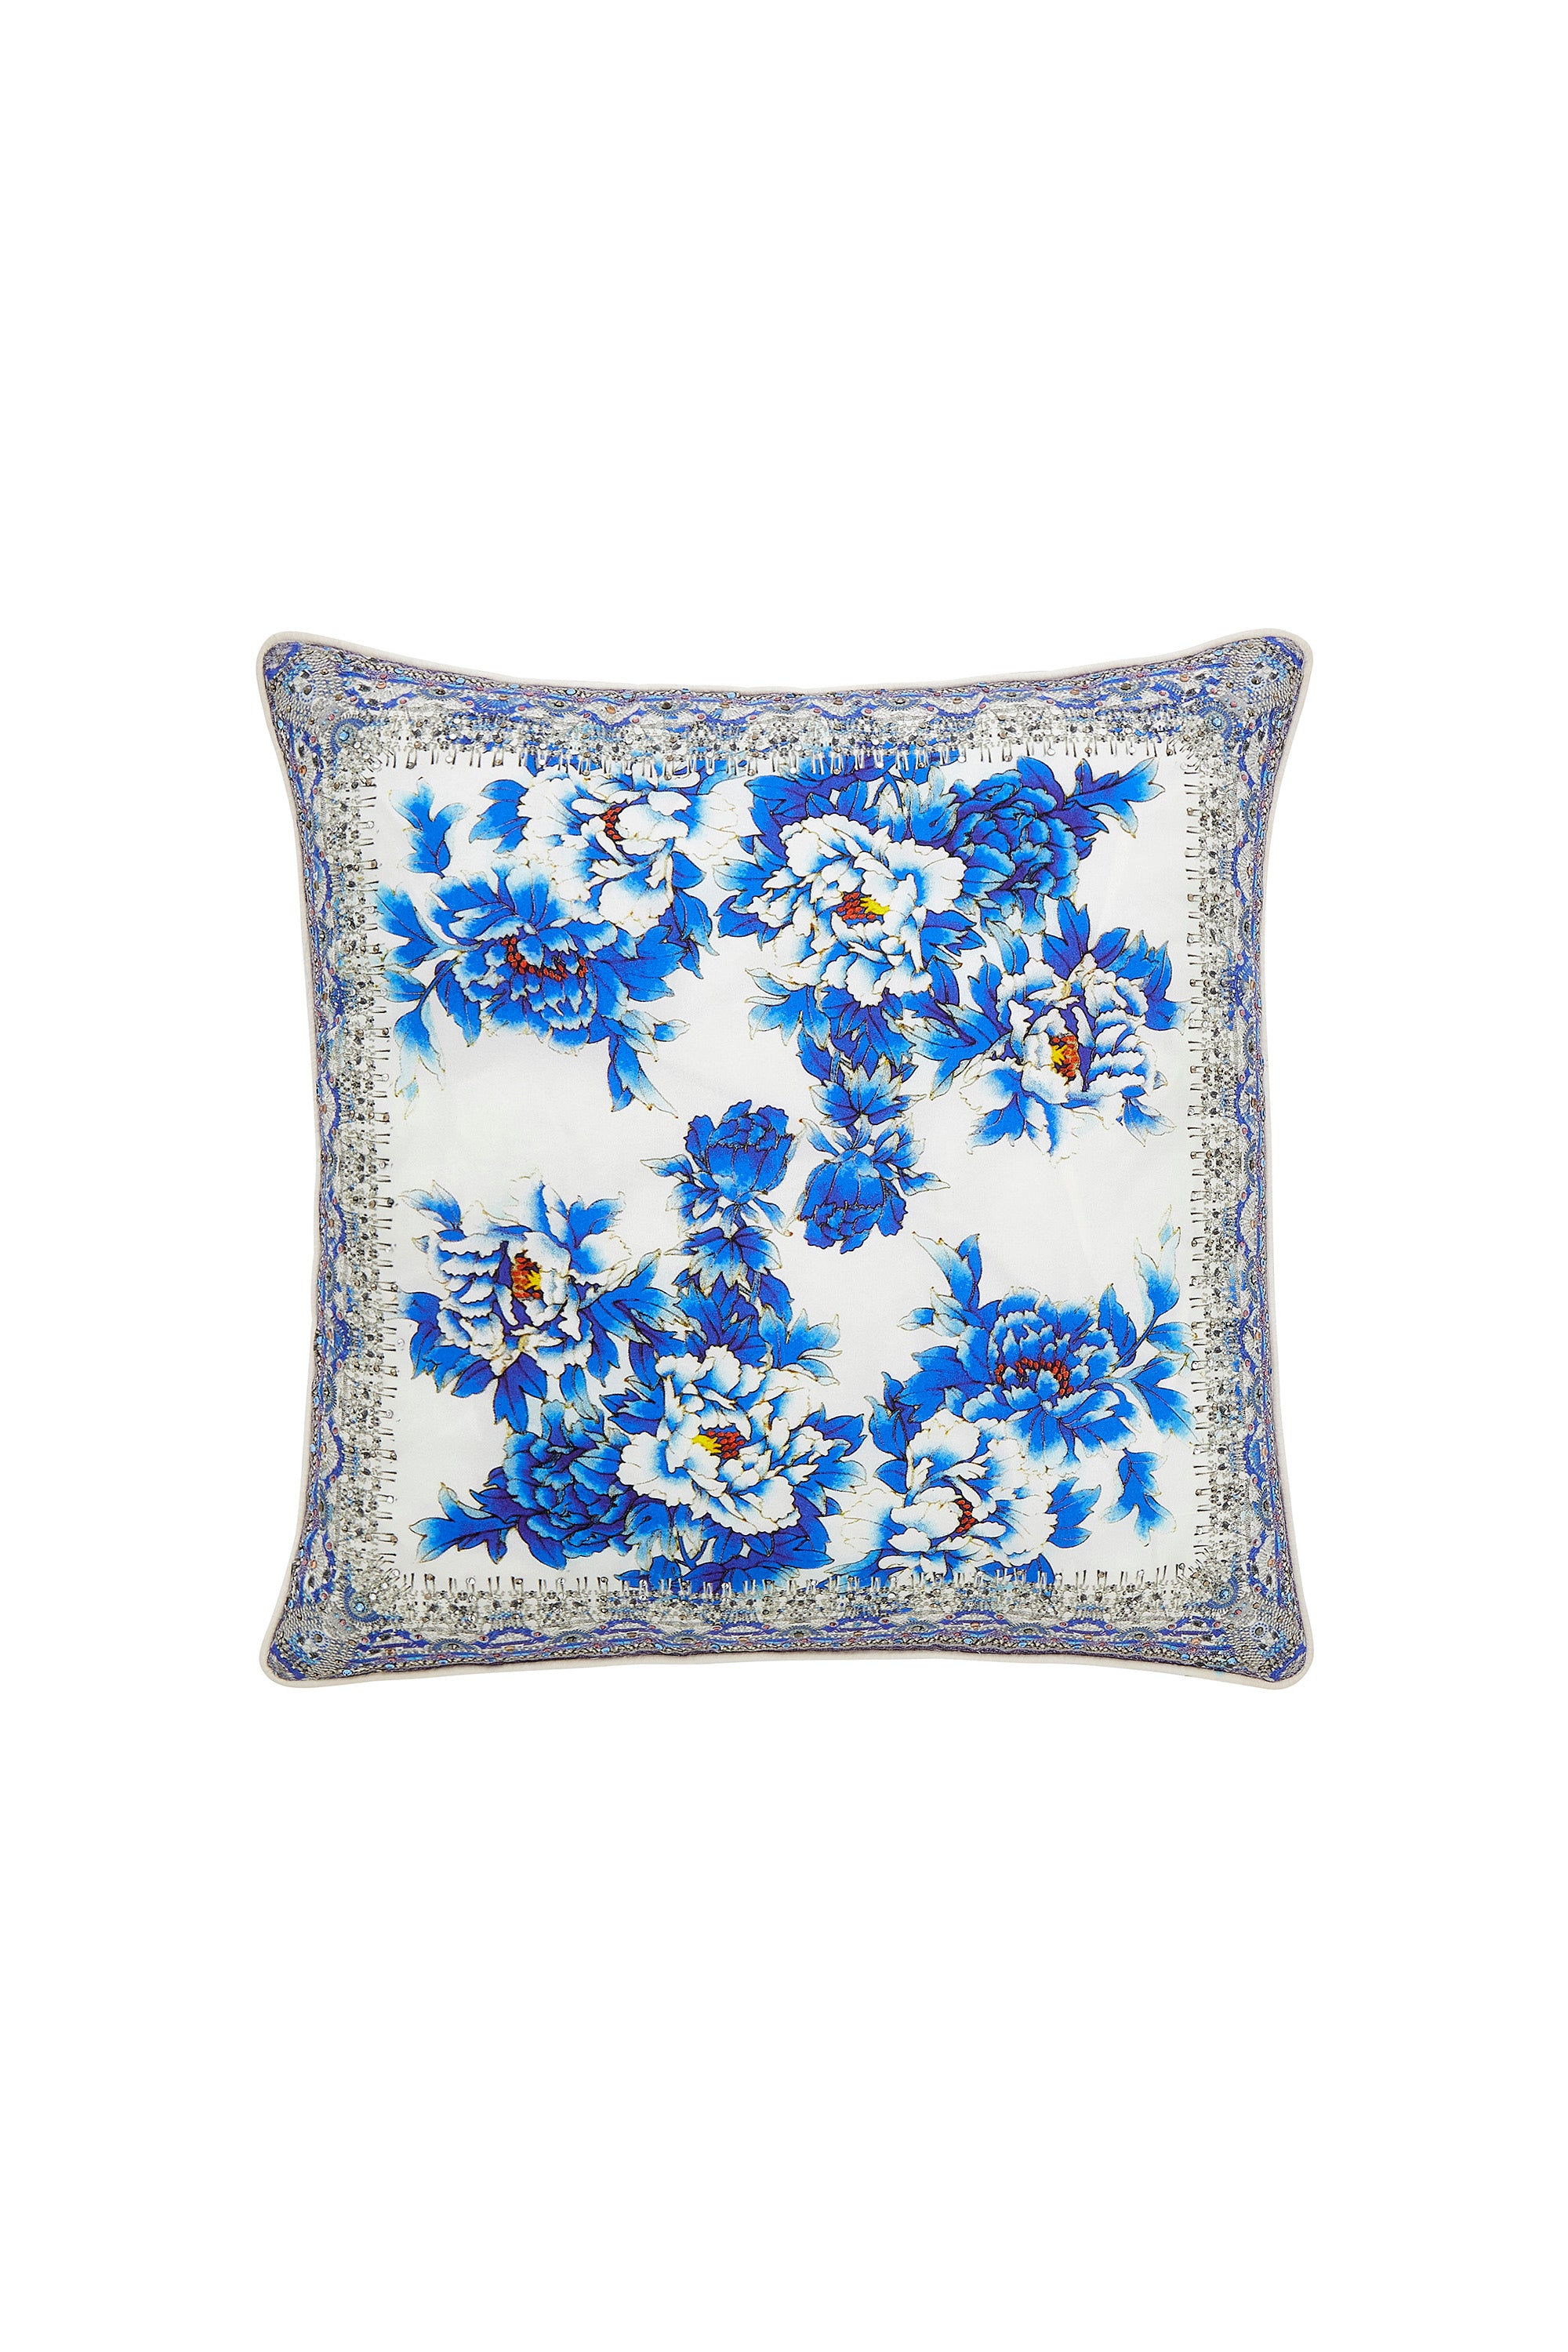 RING OF ROSES SMALL SQUARE CUSHION